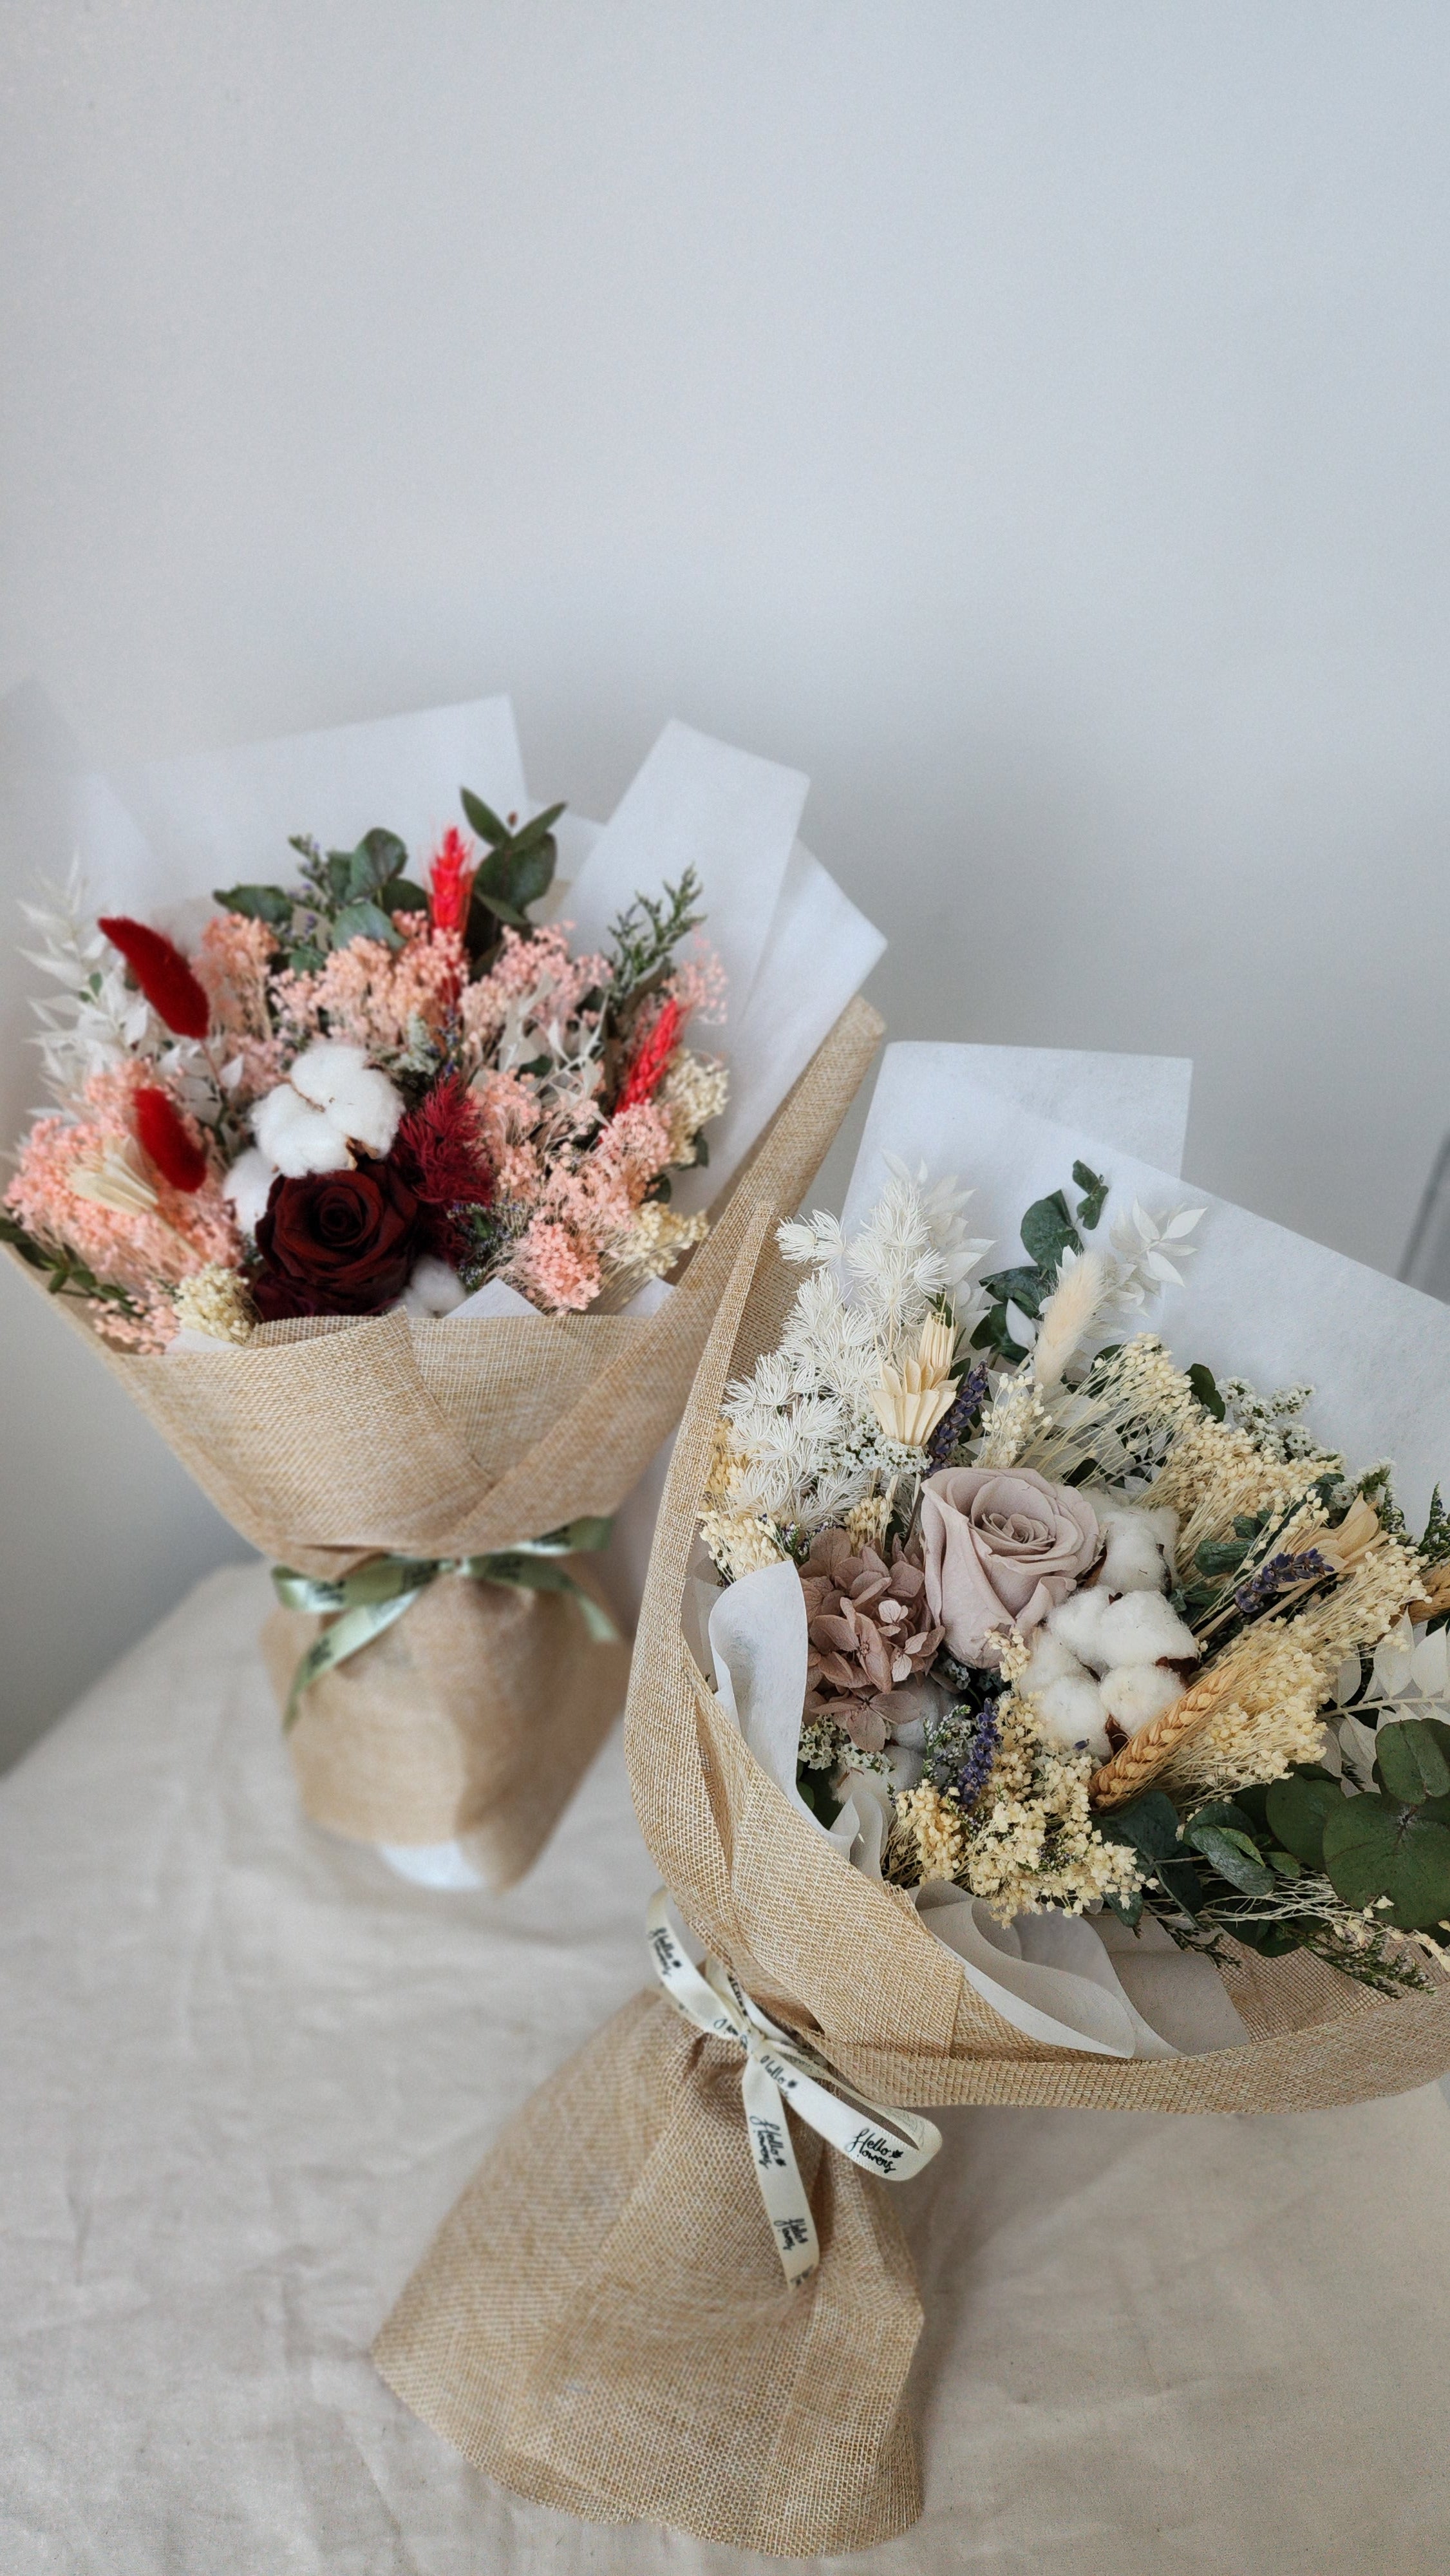 Top Reasons to Choose Preserved Flowers Over Fresh Flowers